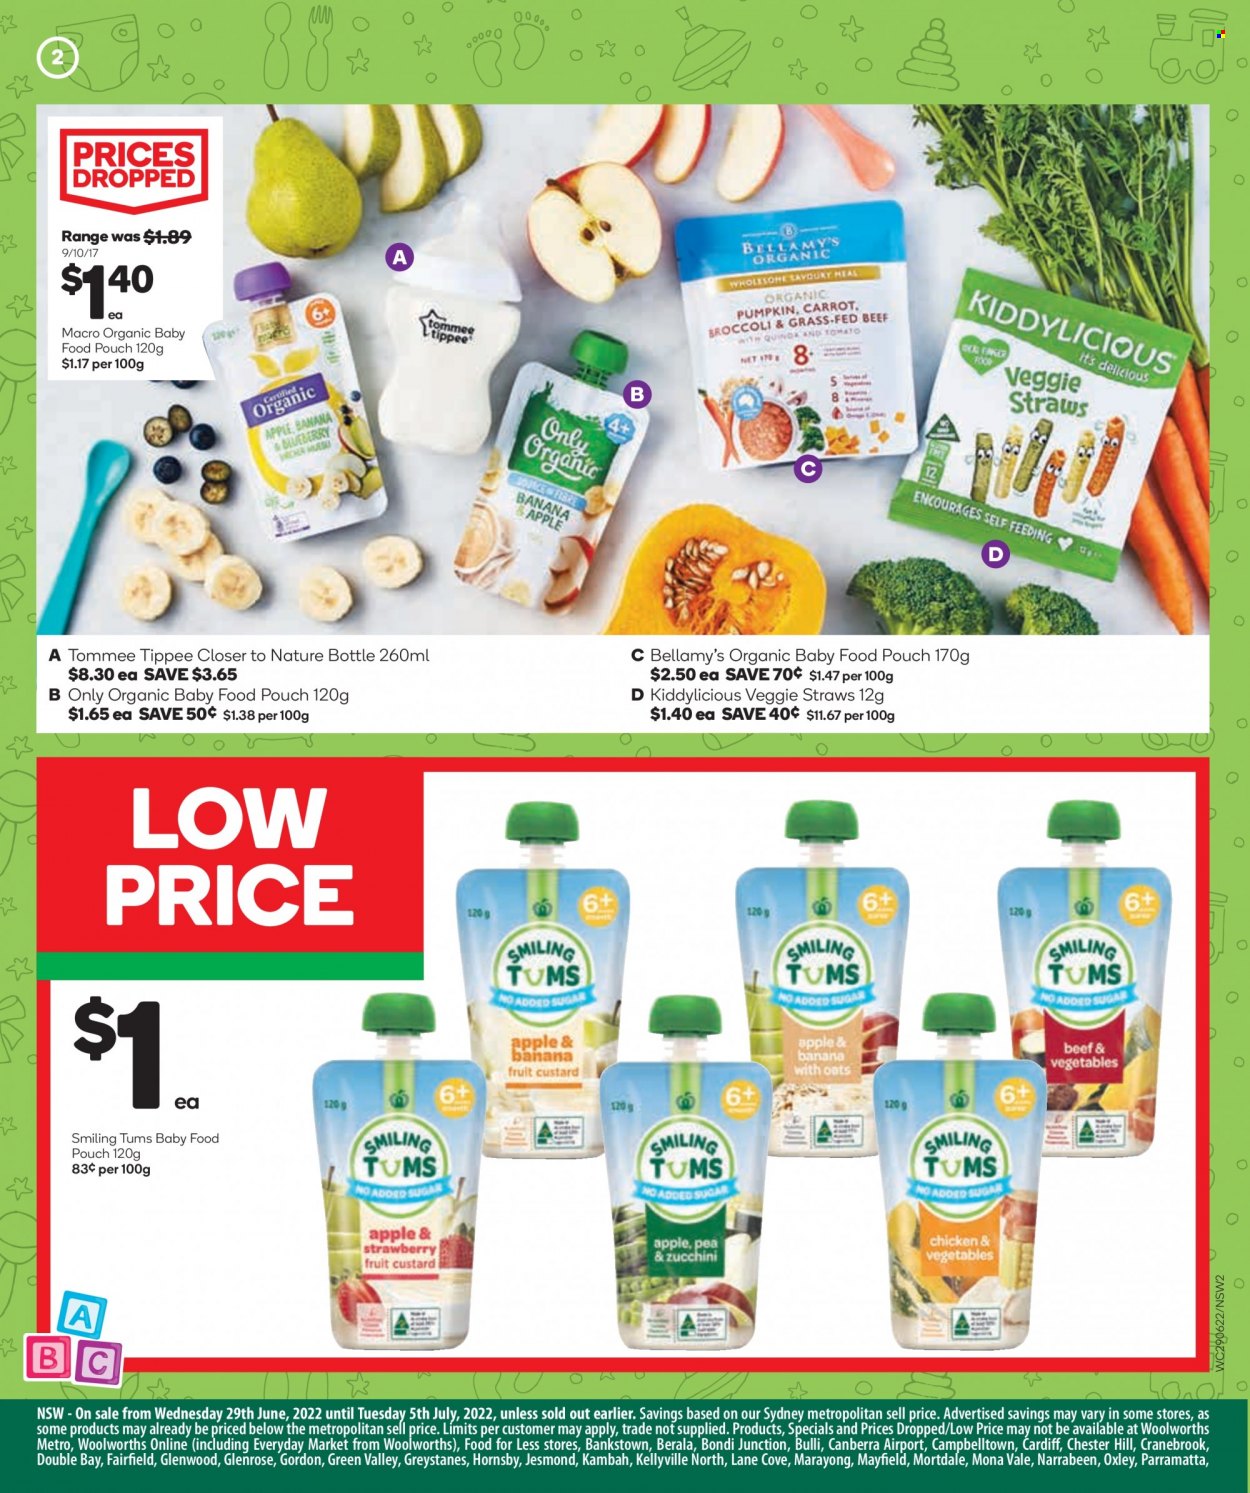 thumbnail - Woolworths Catalogue - 29 Jun 2022 - 5 Jul 2022 - Sales products - broccoli, zucchini, custard, veggie straws, baby food pouch, organic baby food. Page 3.